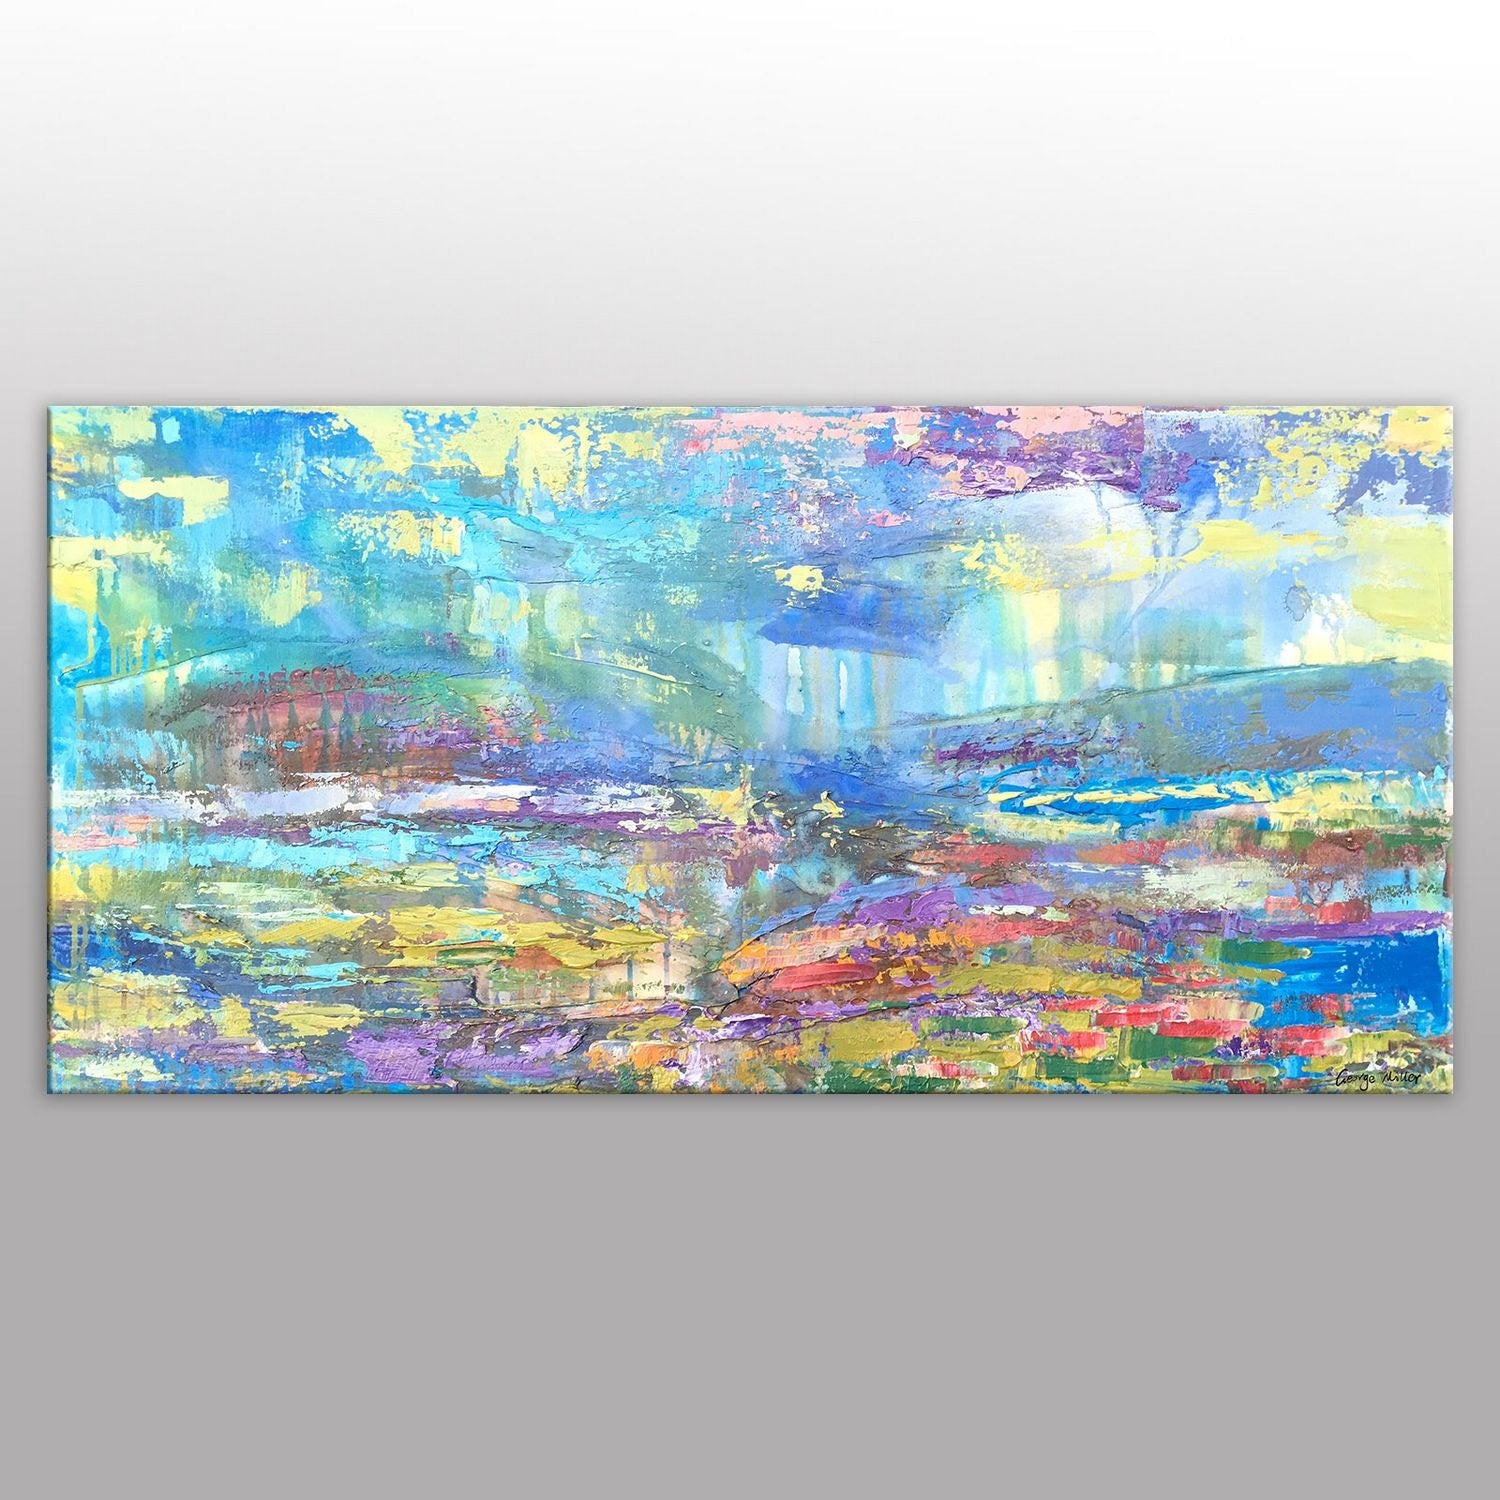 Abstract Painting, Abstract Canvas Painting, Blue, Original Abstract Art, Abstract Landscape Painting, Abstract Art, Modern Painting